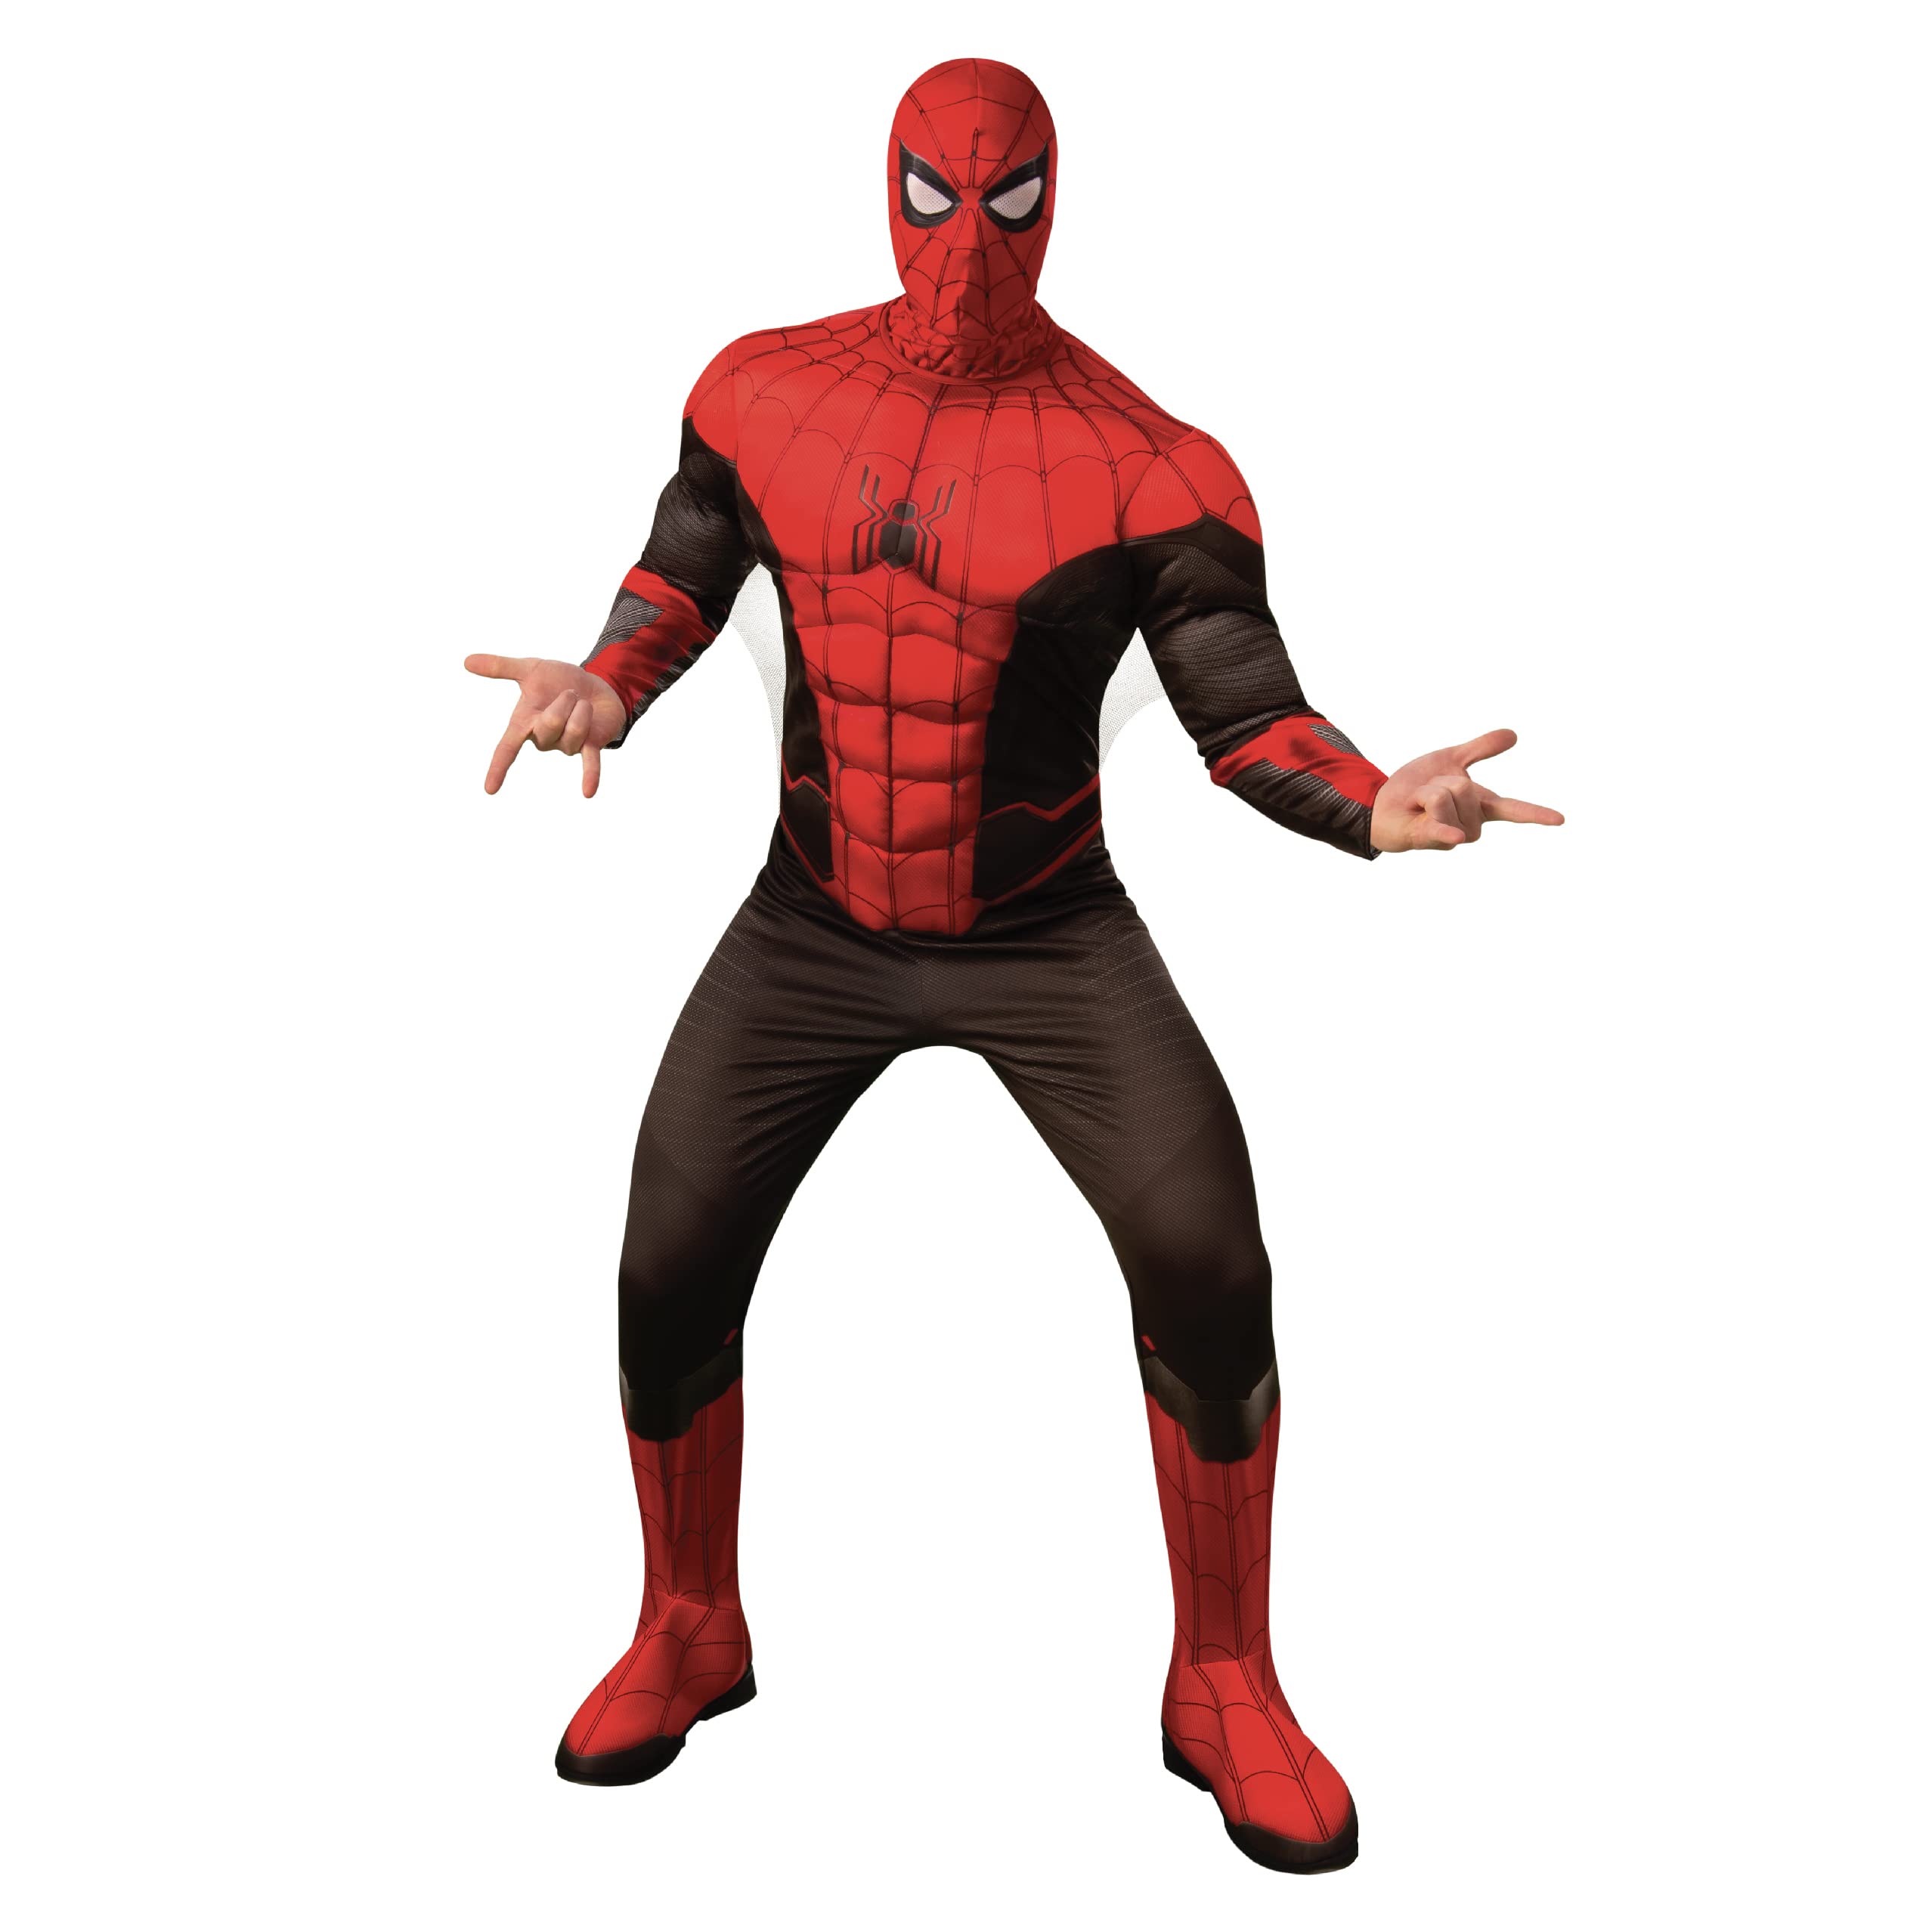 Mua Rubies Men's Marvel: Spider-Man No Way Home Deluxe Costume Jumpsuit and Fabric  Mask, Far From Home trên Amazon Mỹ chính hãng 2023 | Giaonhan247